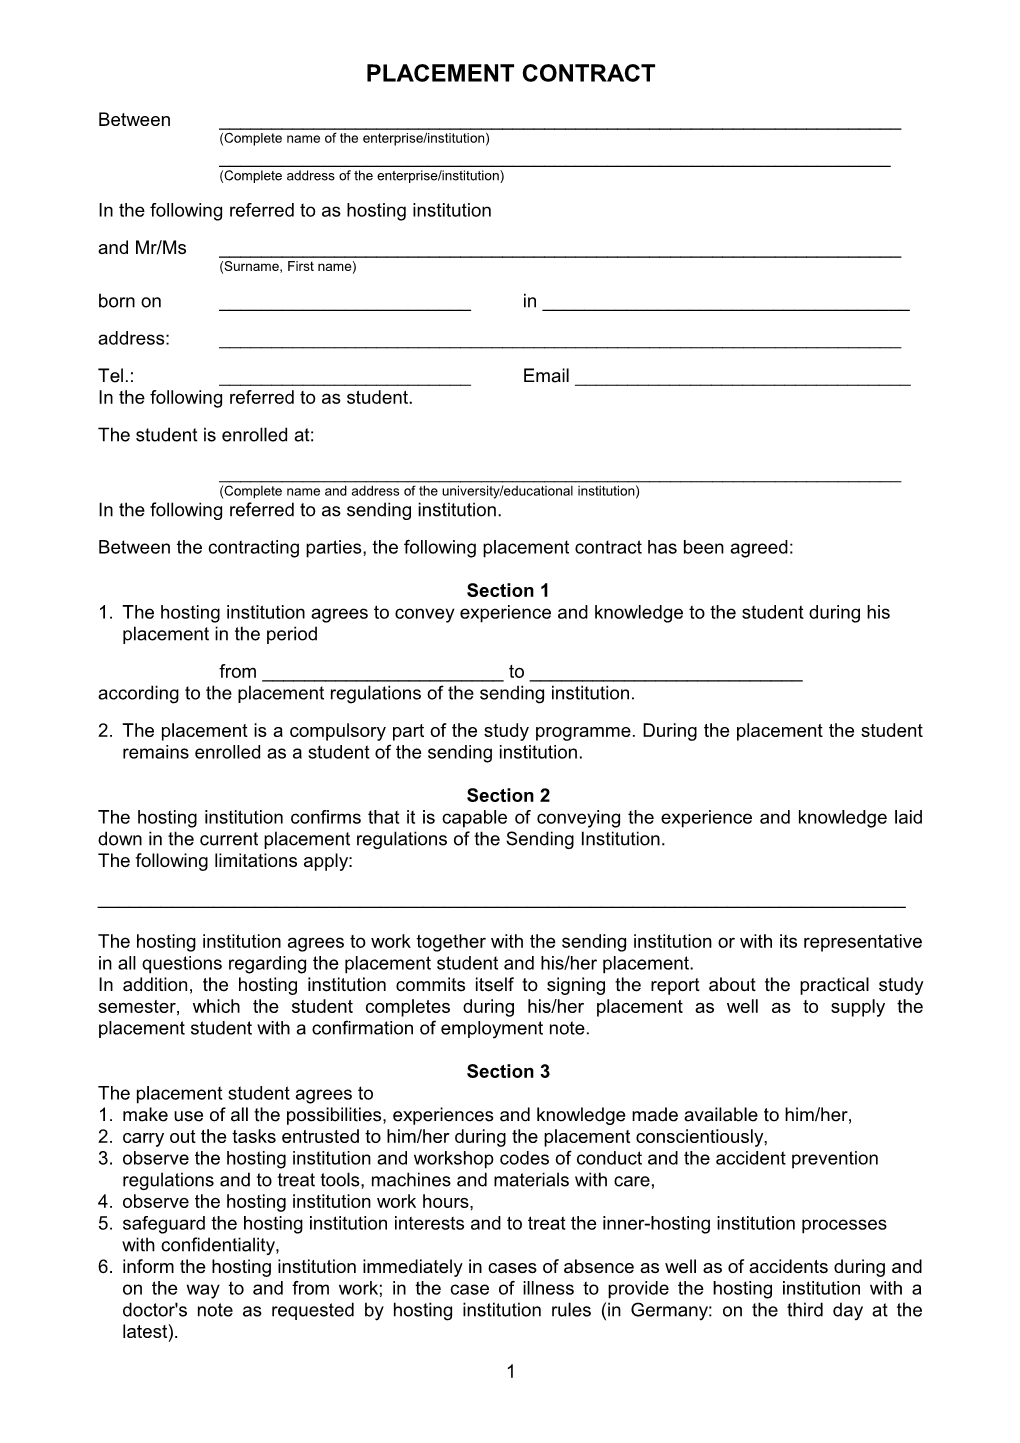 Placement Contract